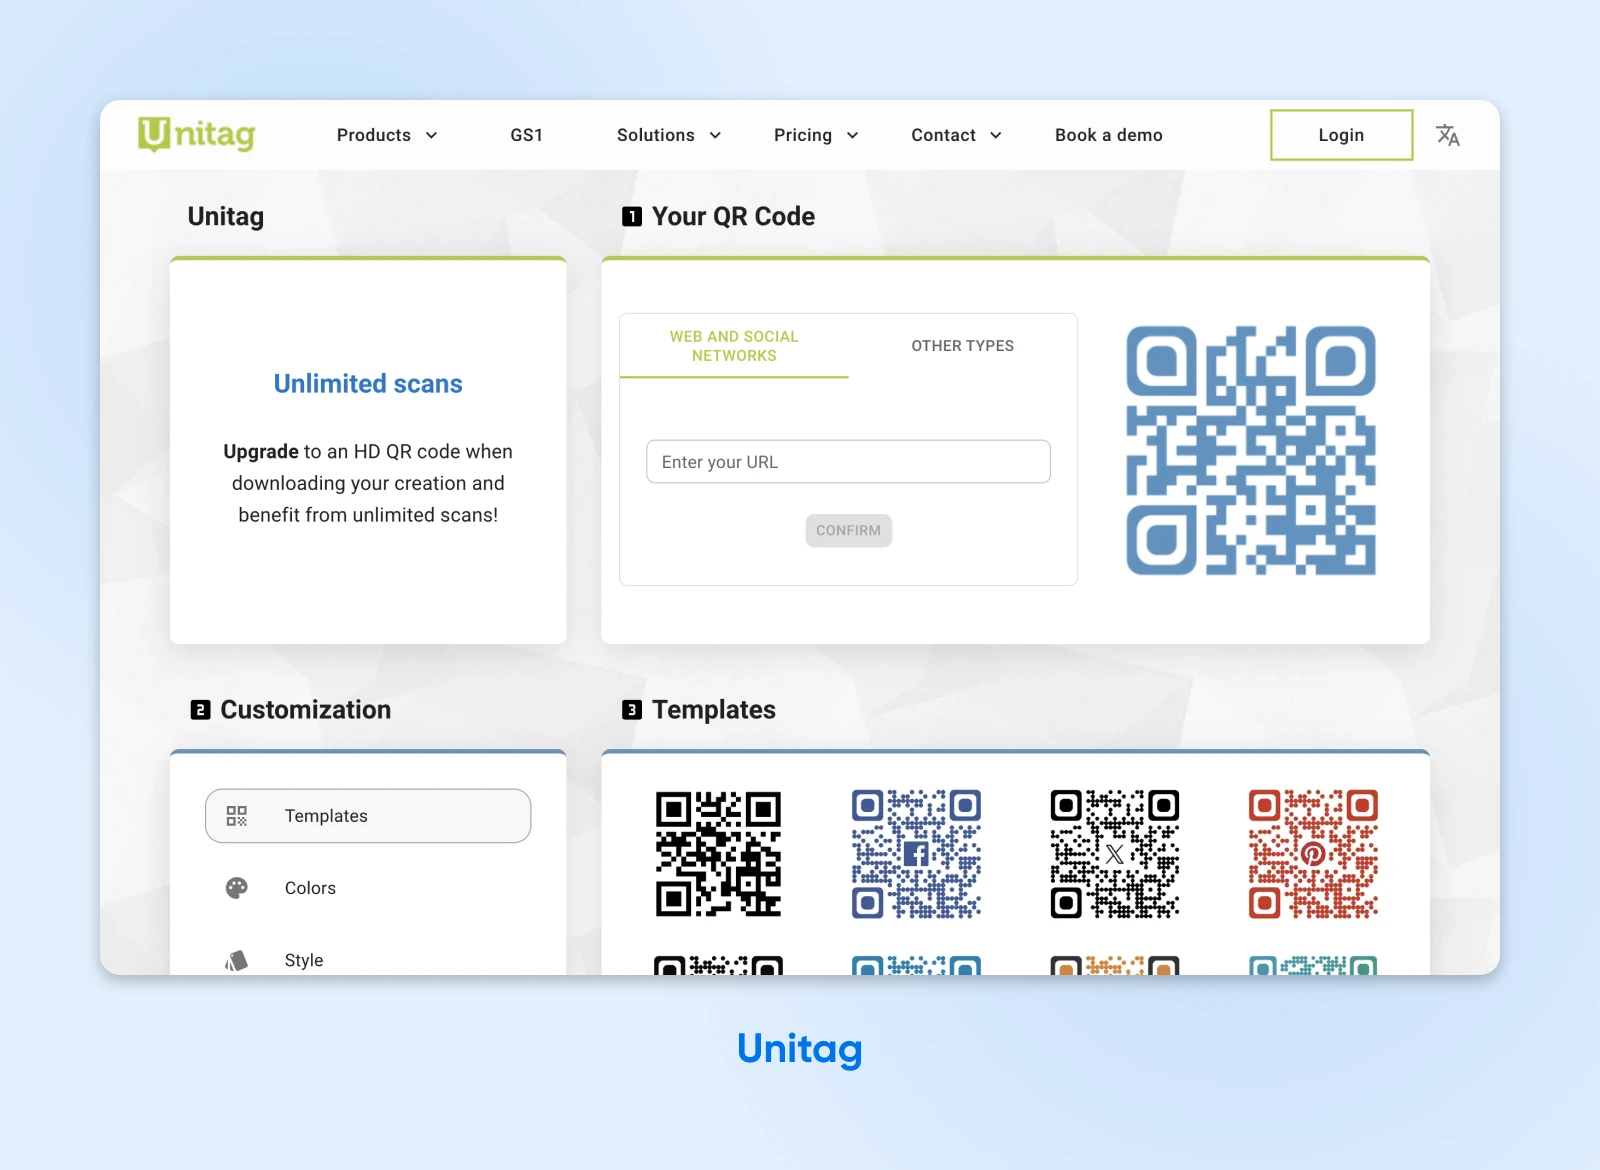 Unitag's user interface shows your QR code design at the upper right next to a form field to enter your URL.